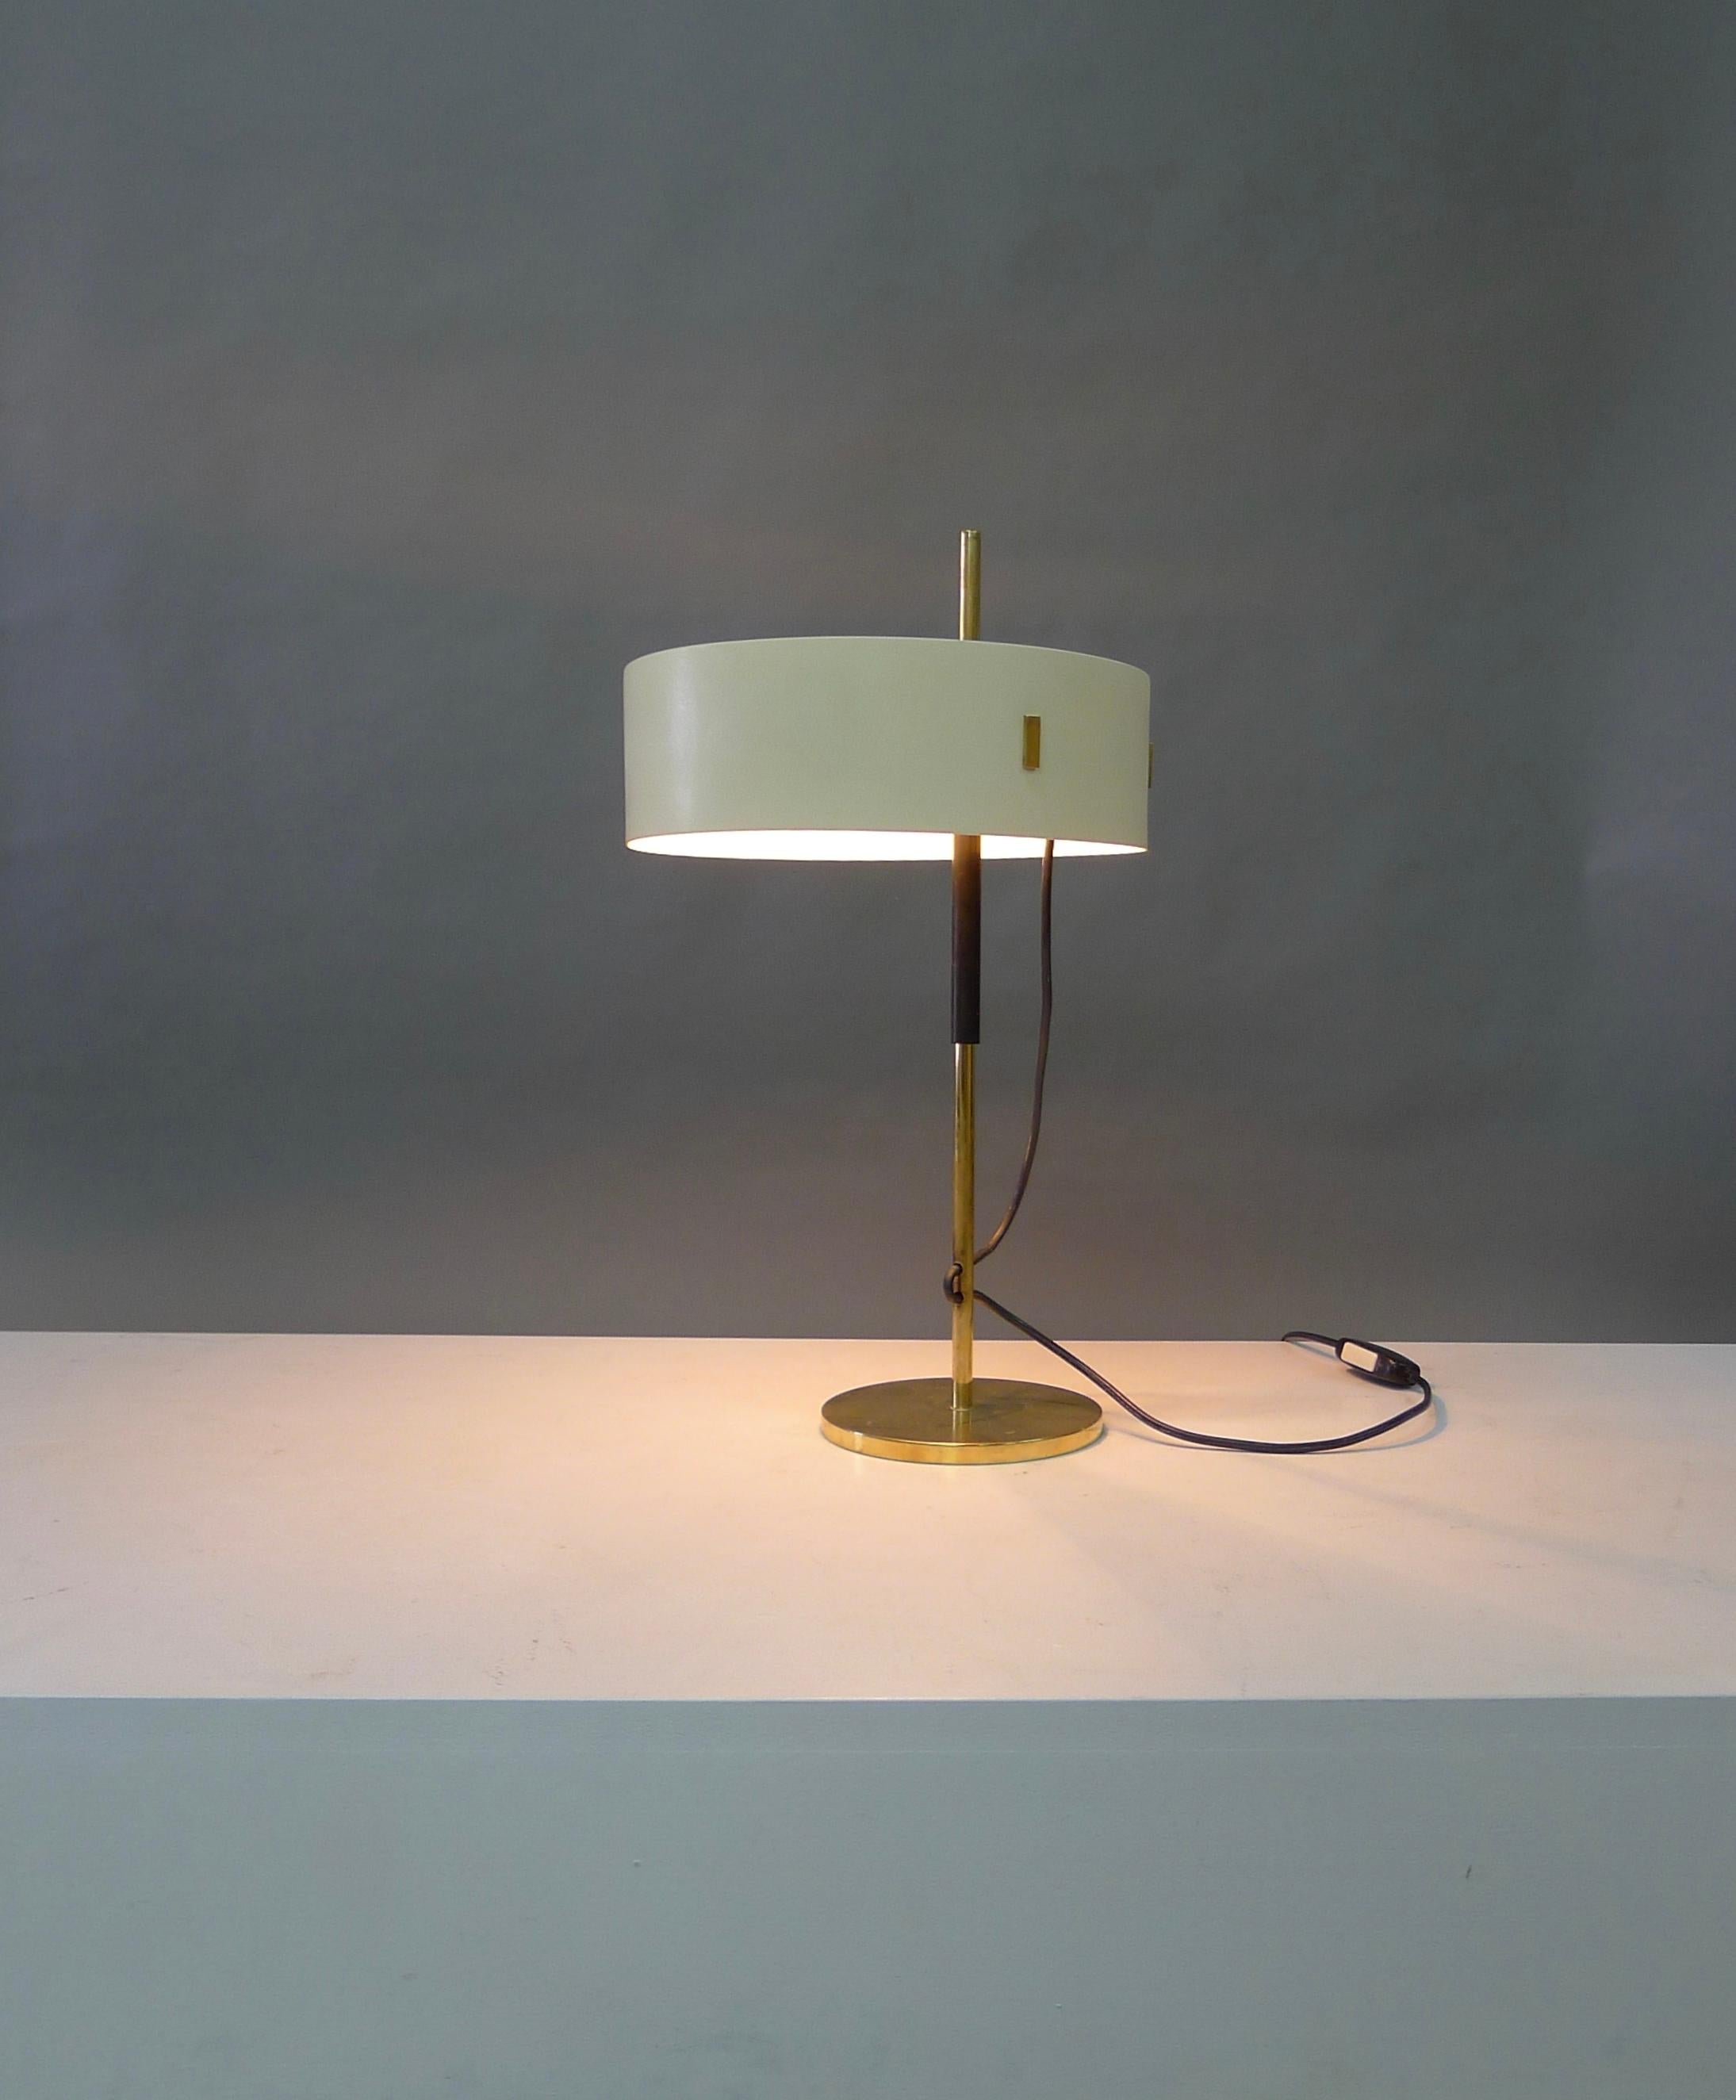 Angelo Ostuni and Roberto Forti for Oluce, Italy, Model 243 desk or table lamp with cream metal shade over brass supporting framework. 
The shade is height adjustable on the central pole.